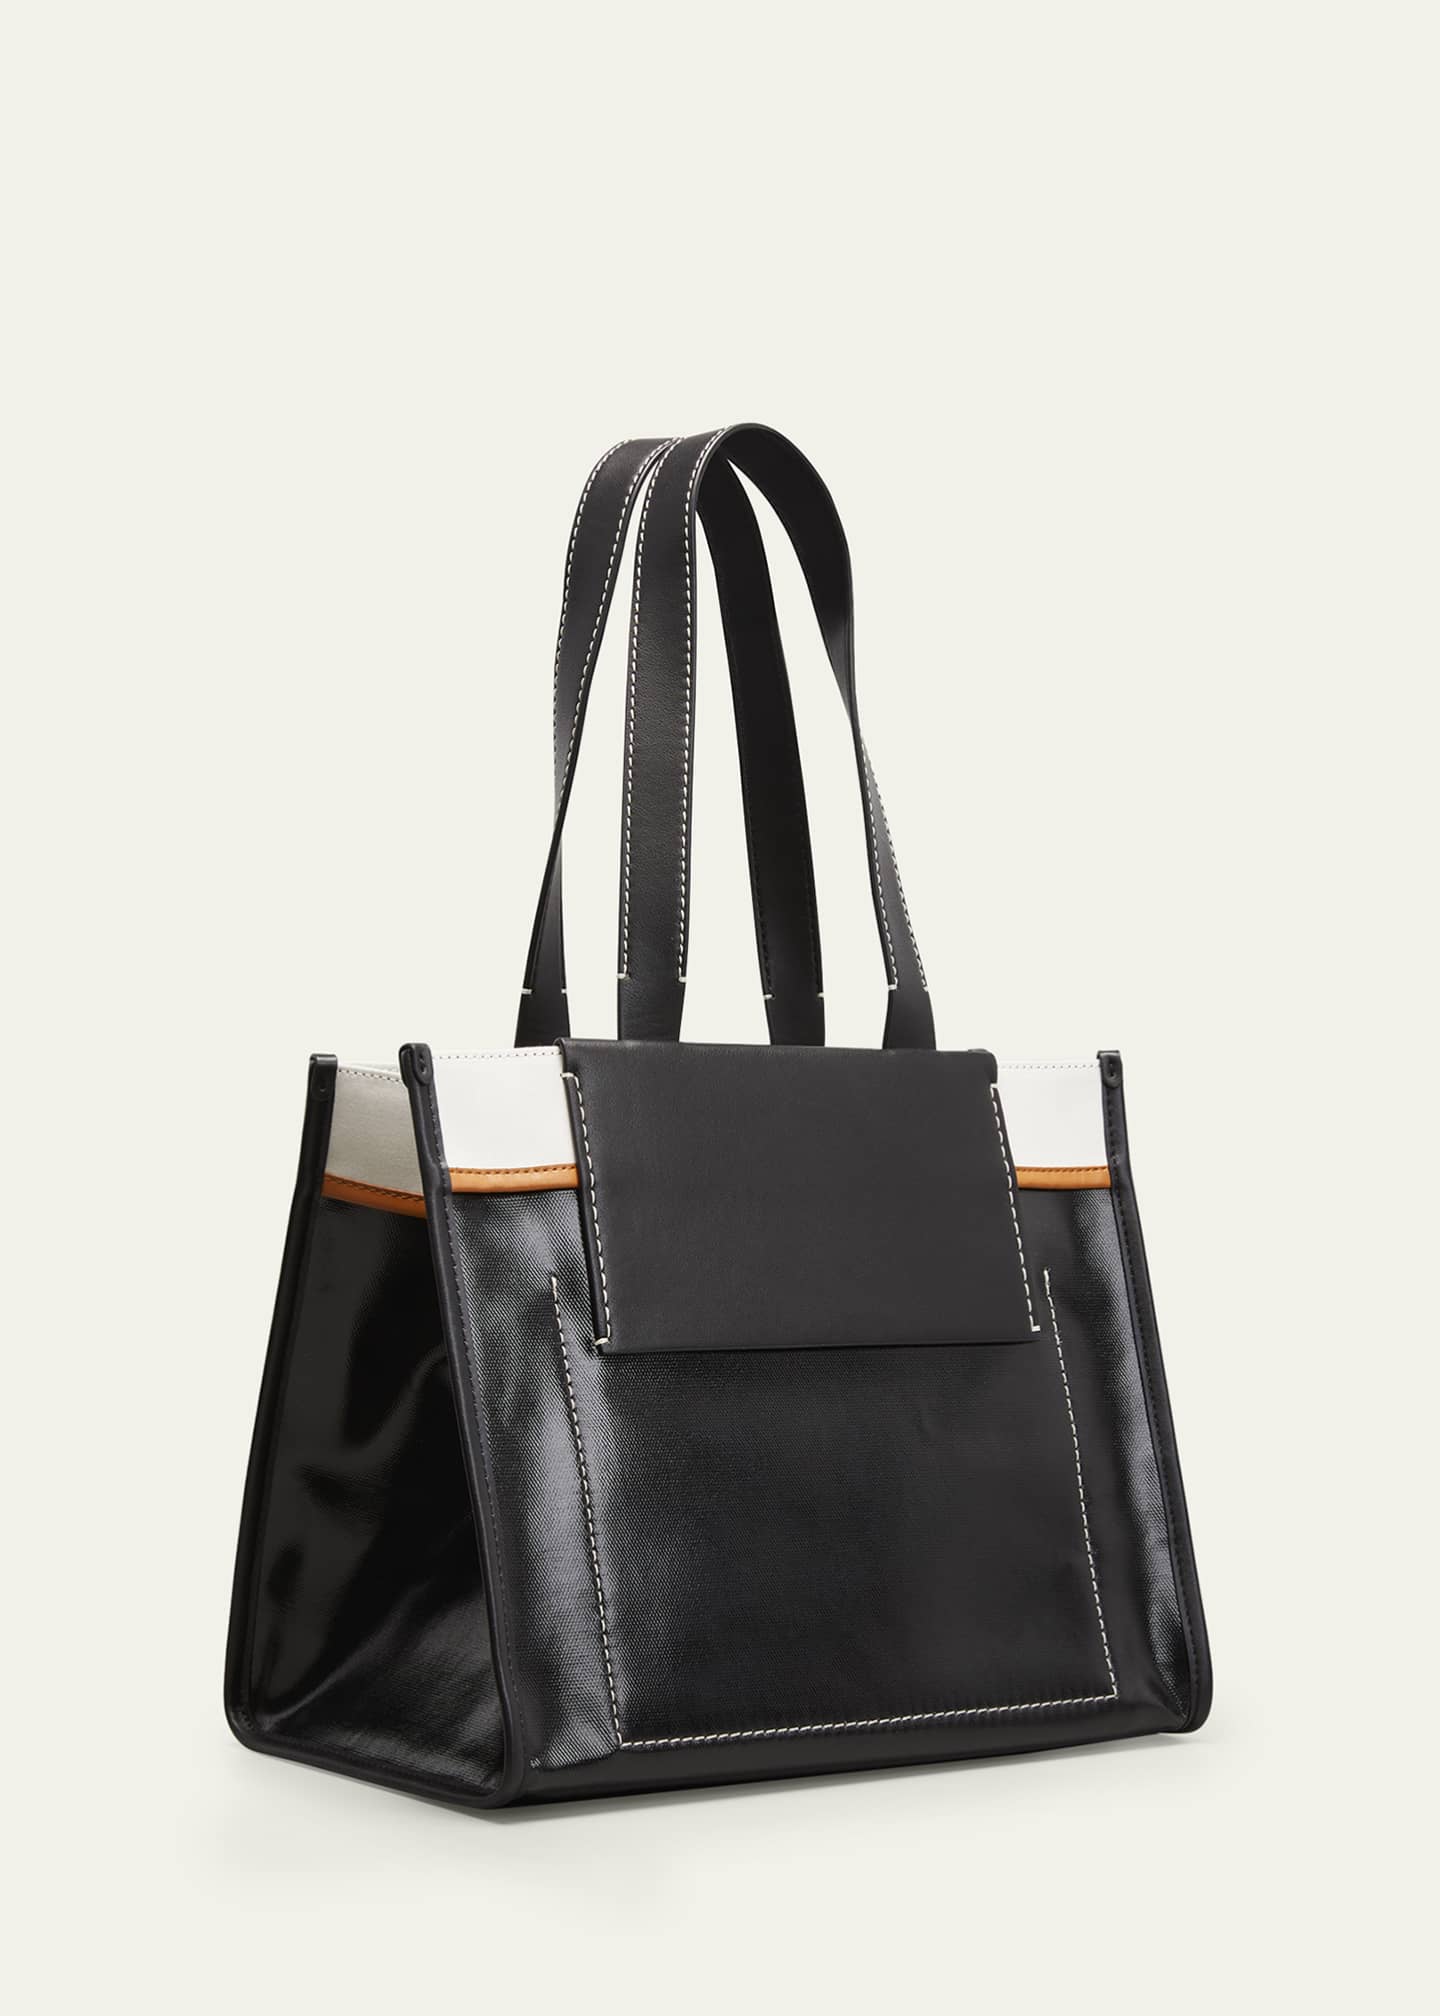 Proenza Schouler White Label Large Morris Coated Canvas Tote